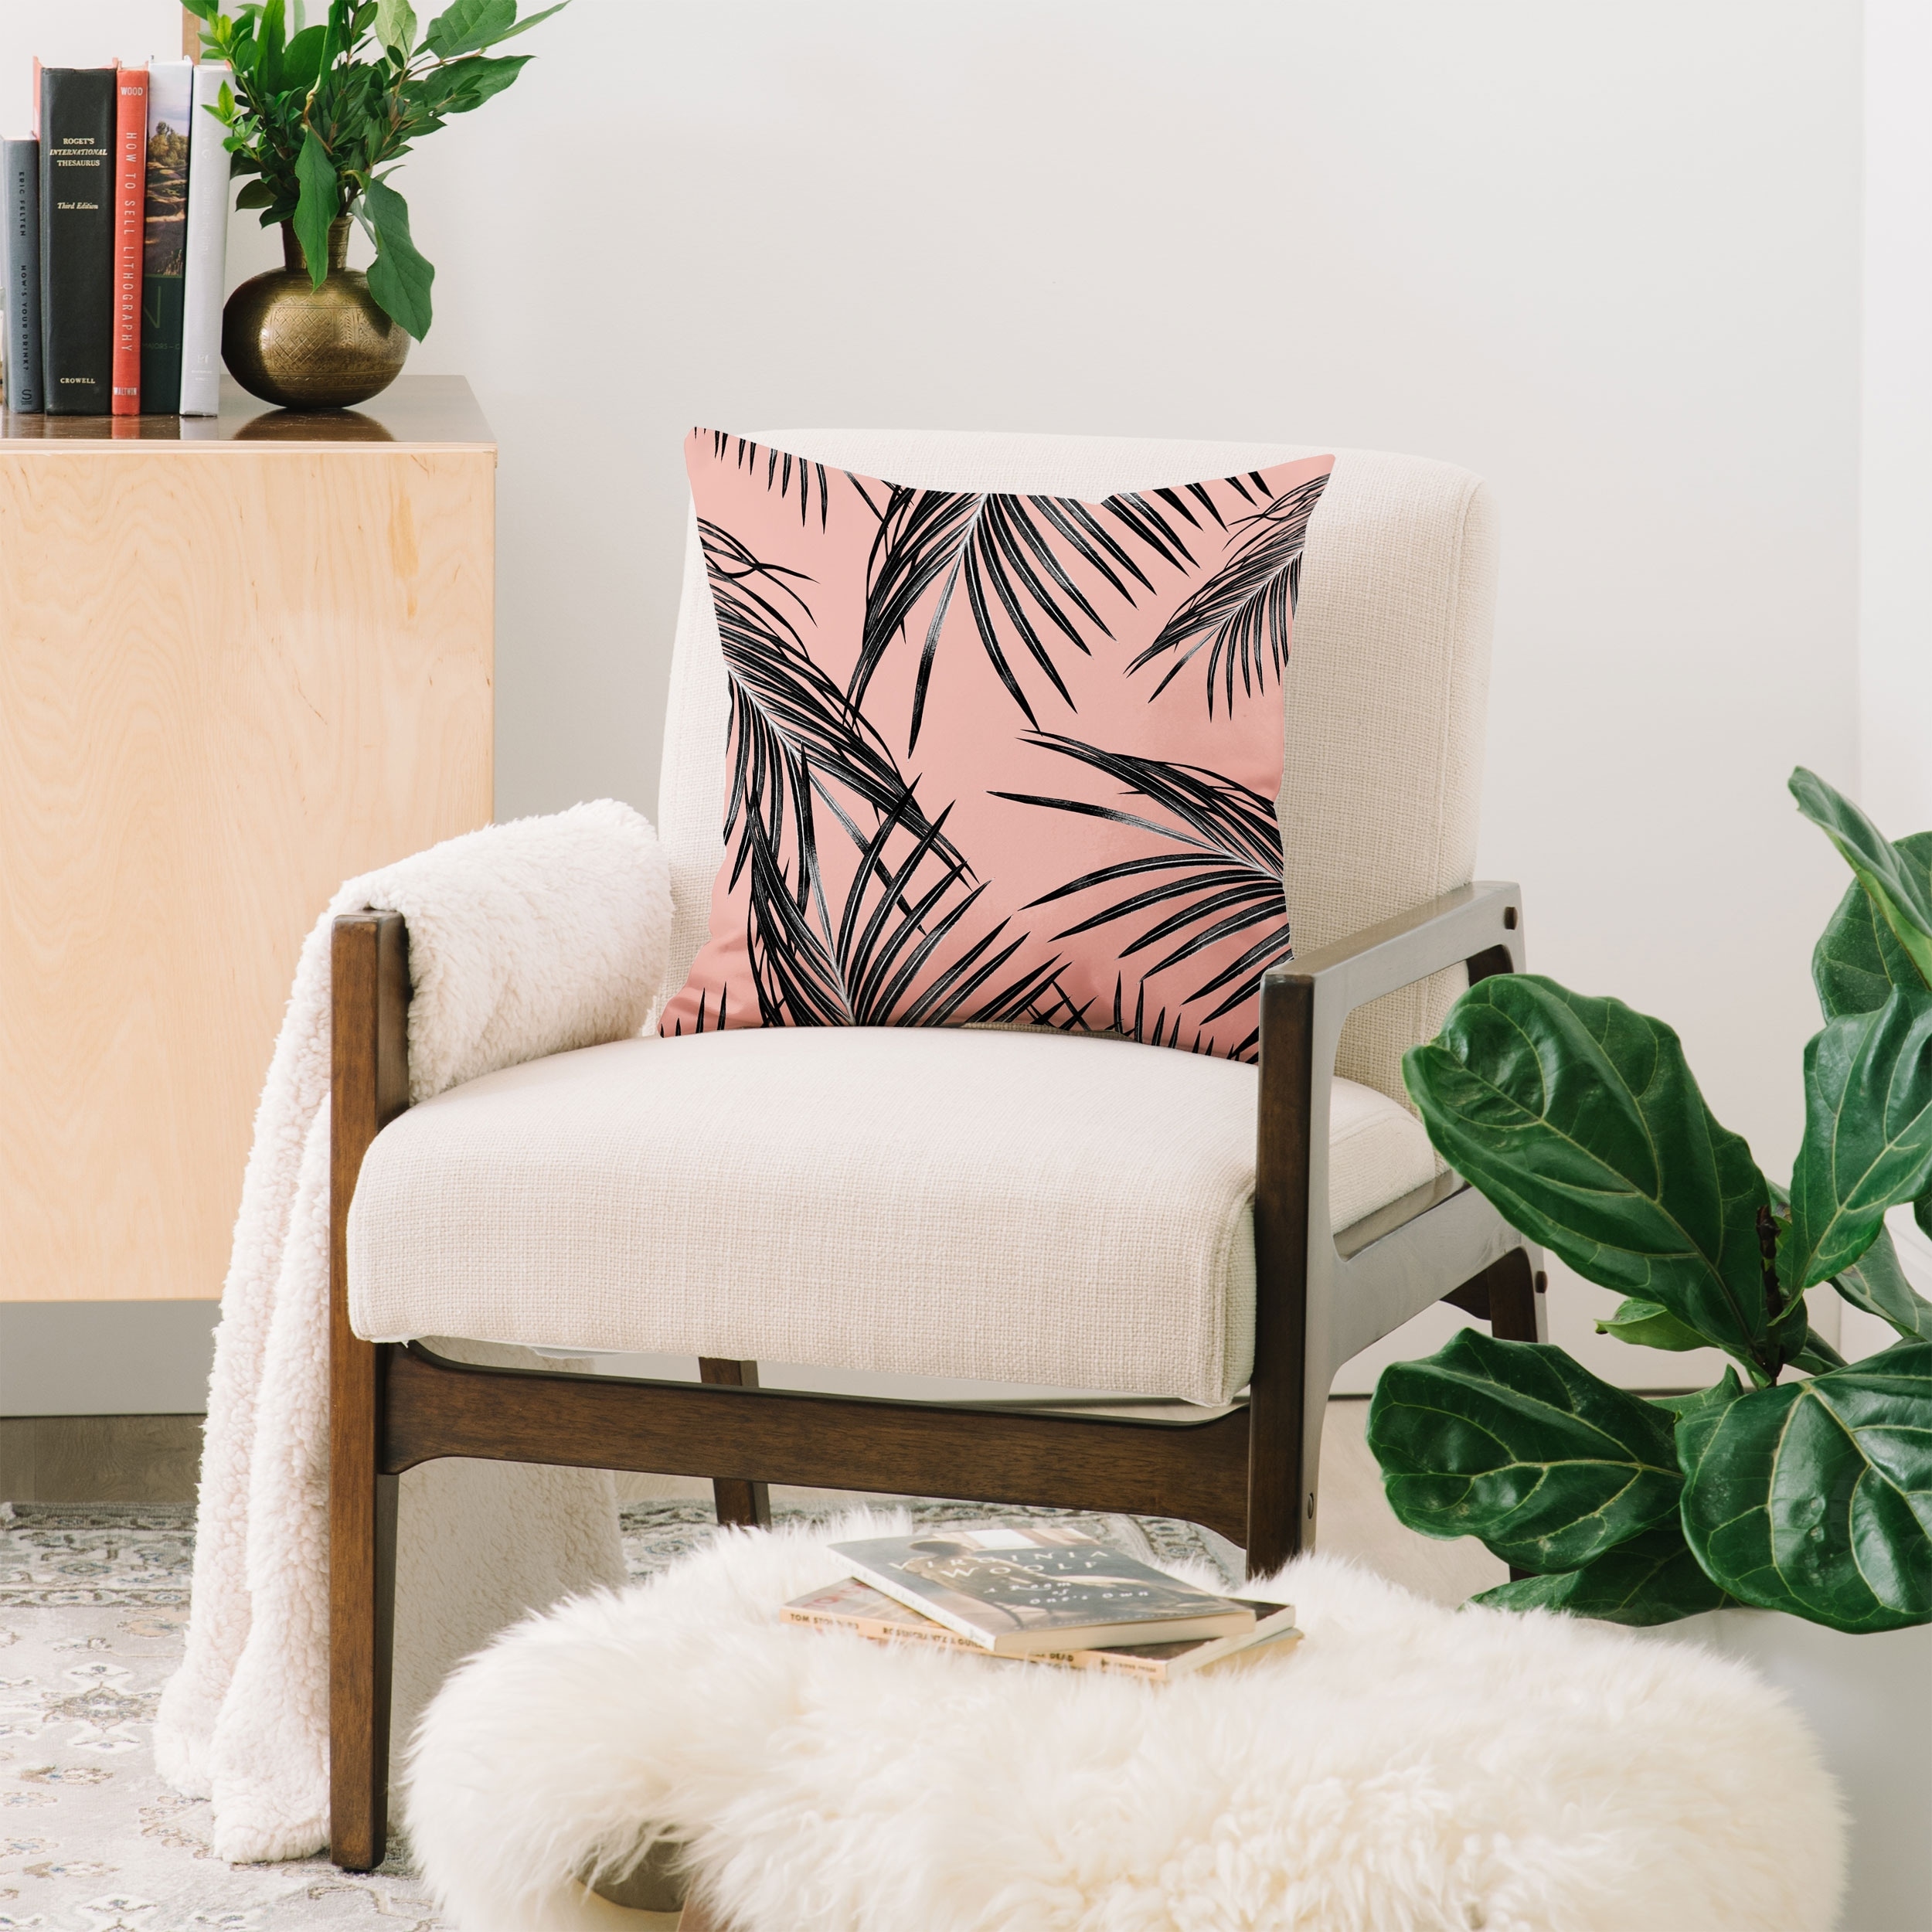 https://ak1.ostkcdn.com/images/products/is/images/direct/19d8a1dc0e396aa6e9de3e08e6df65a526c0d361/Deny-Designs-Black-Palm-Leaves-Dream-Throw-Pillow-%286-size-options%29.jpg